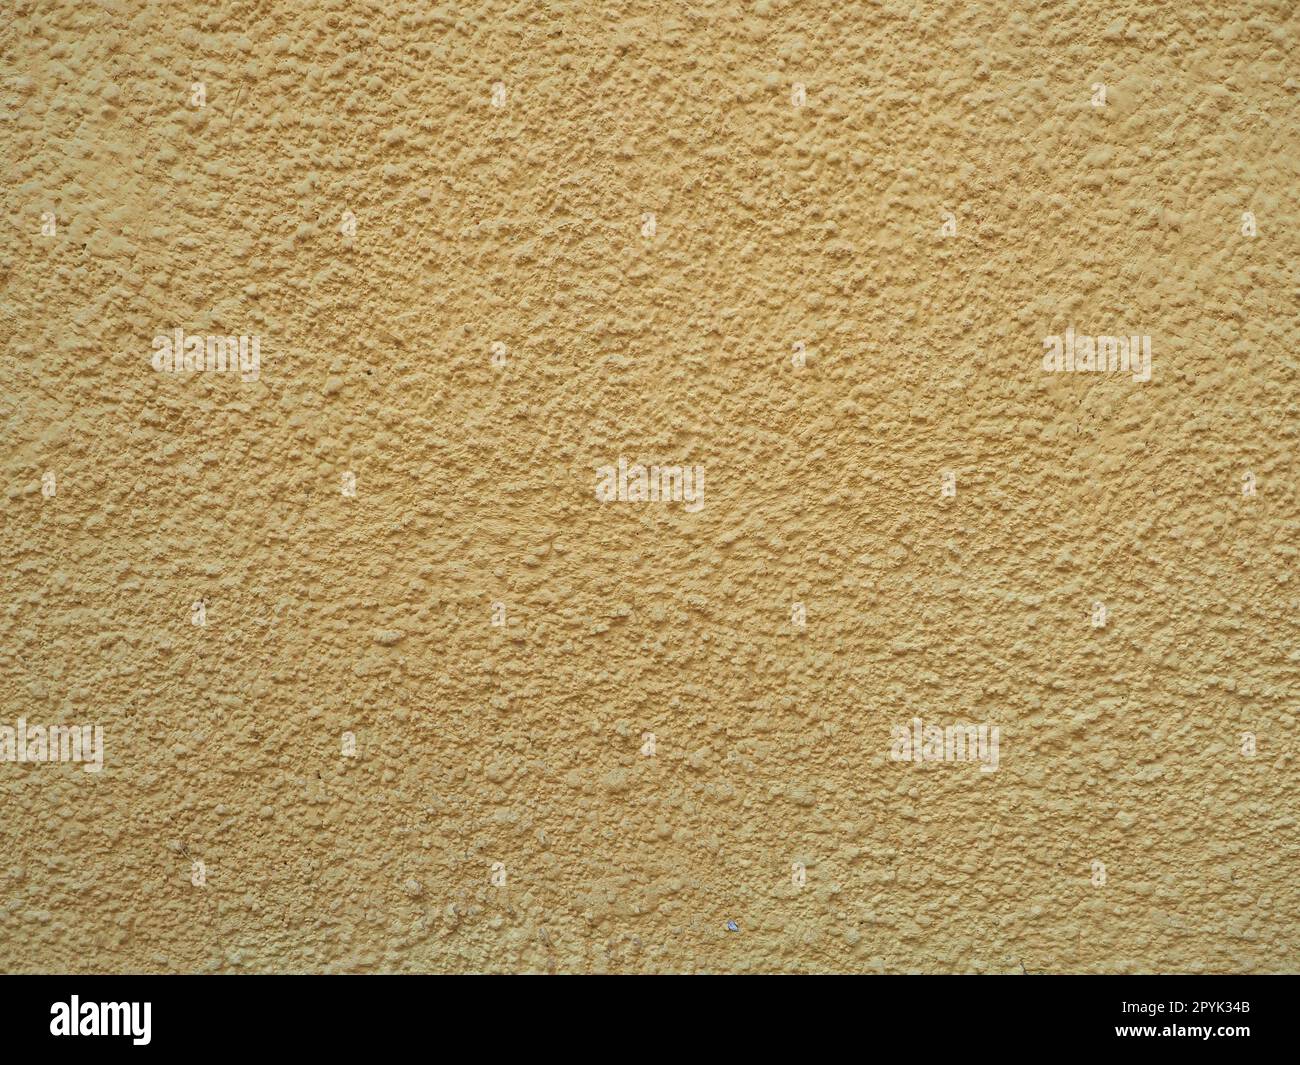 yellow plaster texture useful as a background Stock Photo